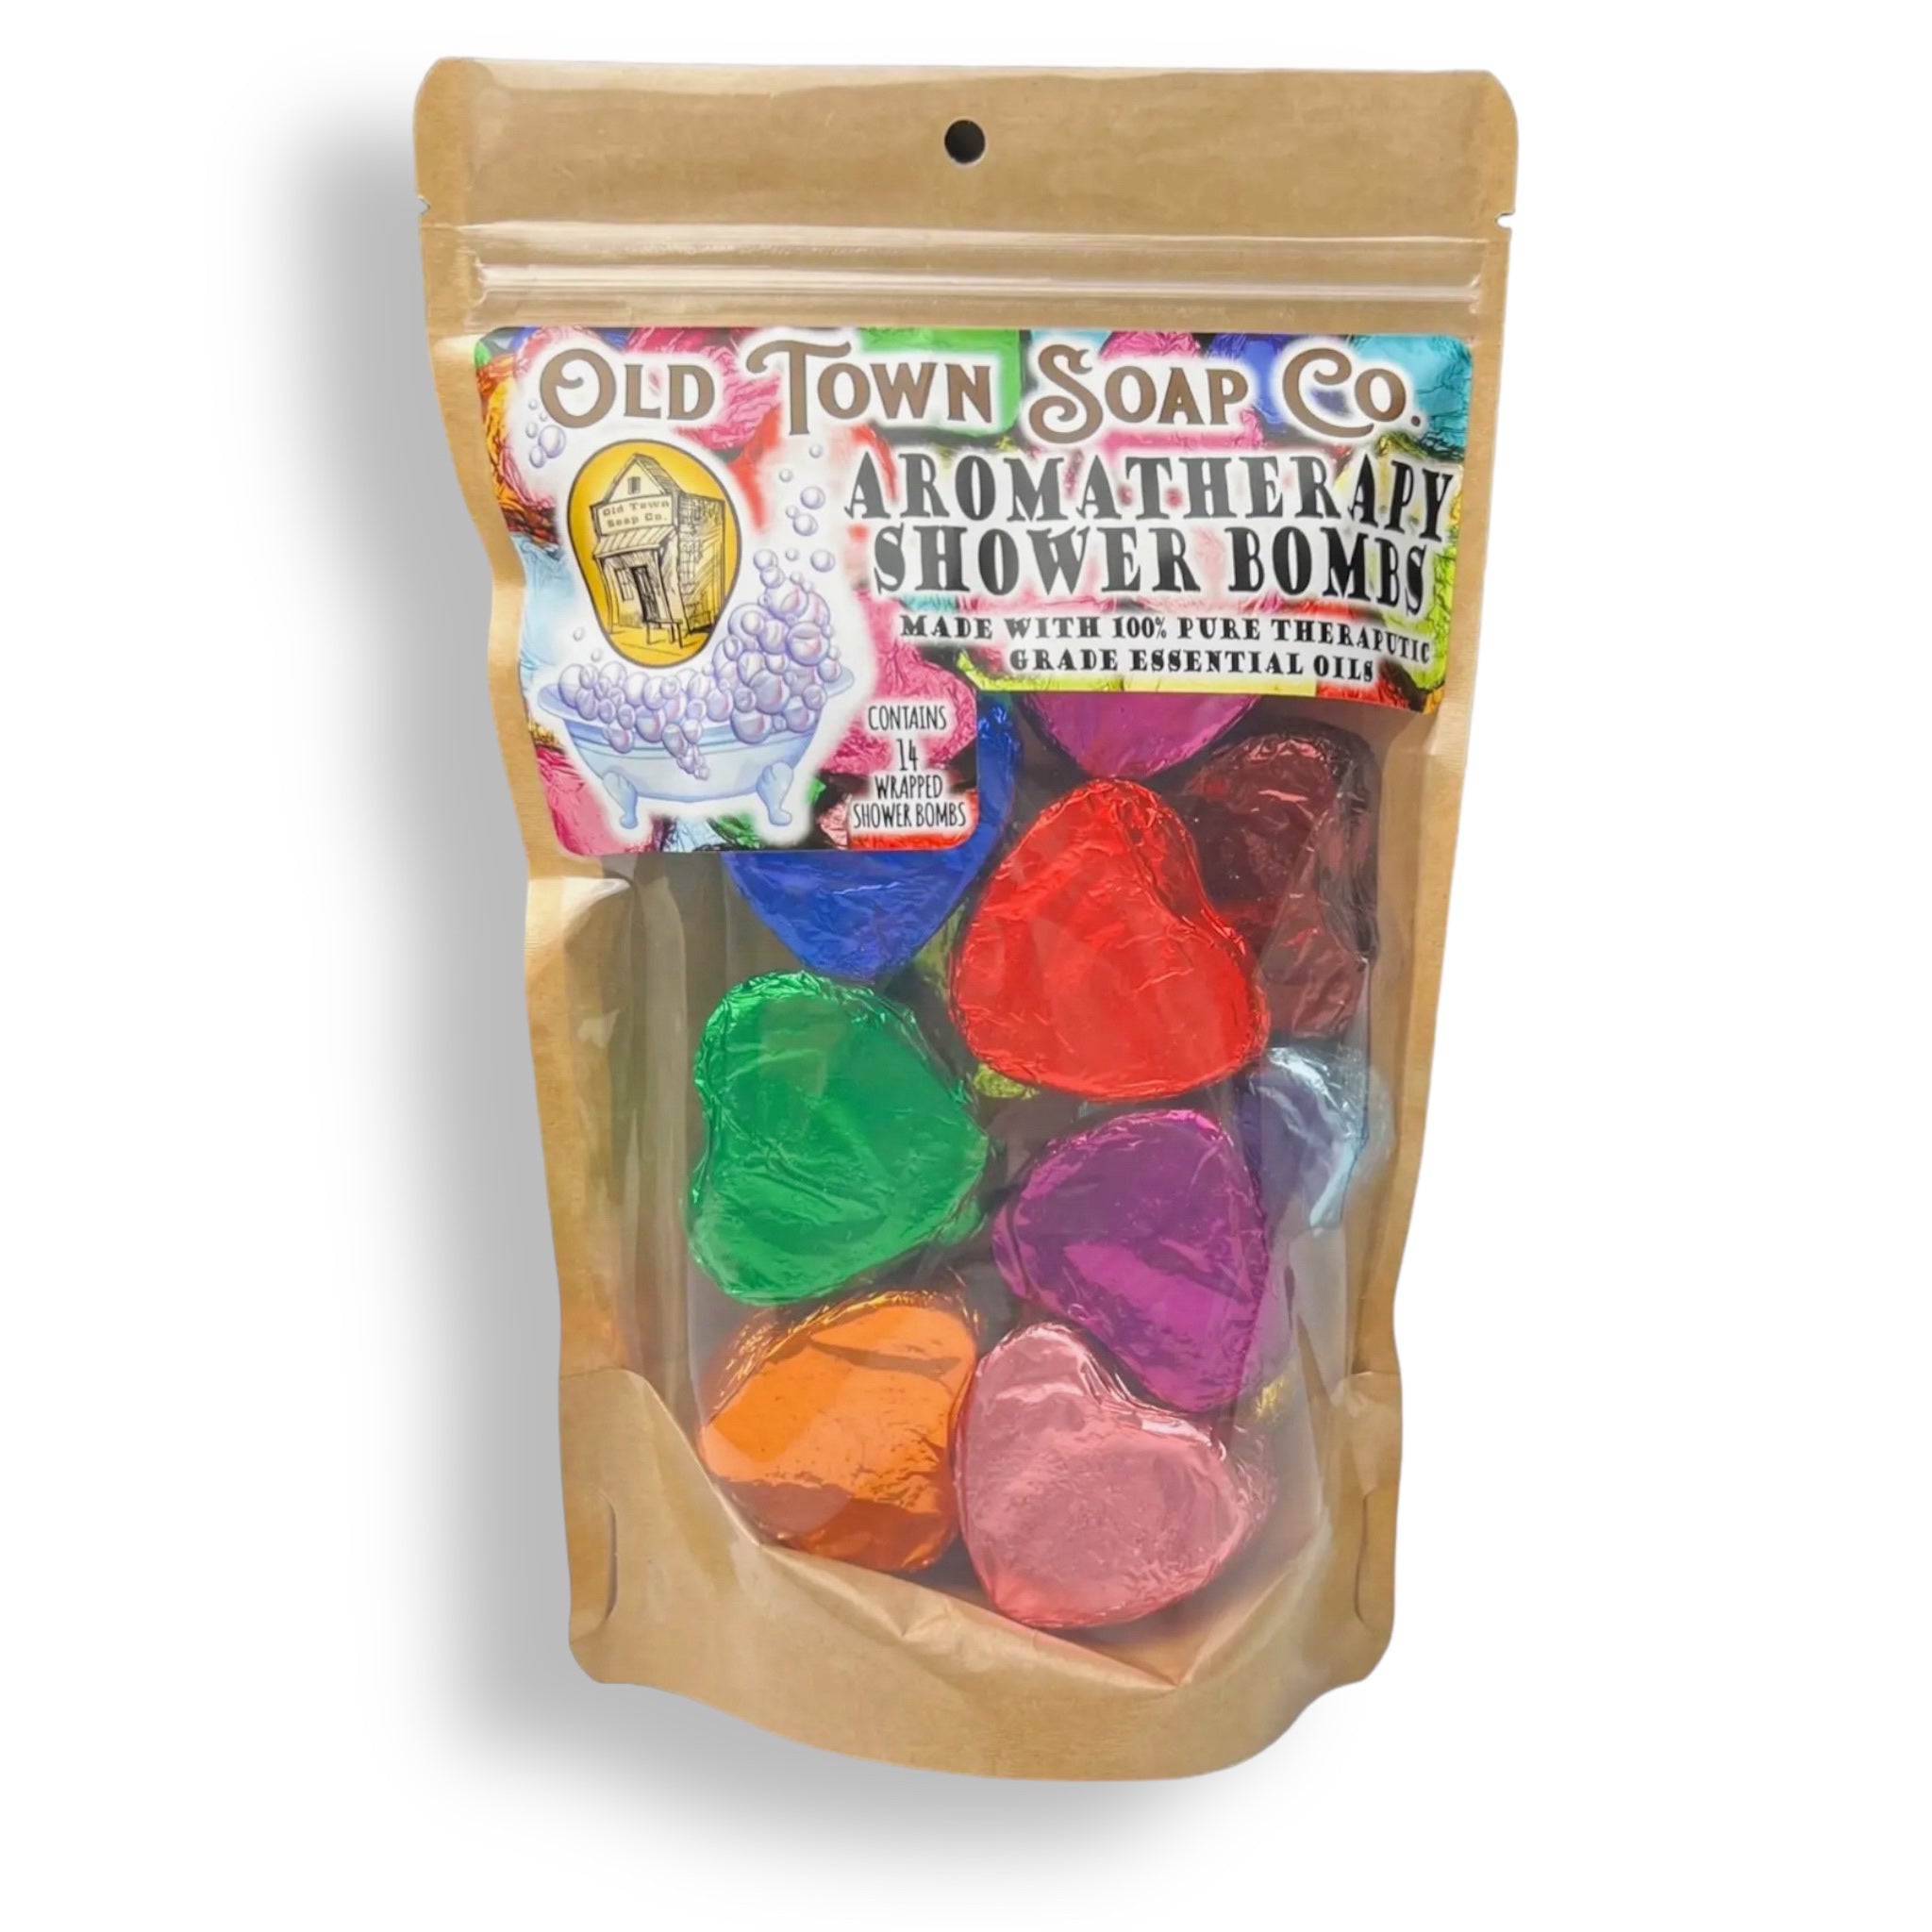 Aromatherapy Shower Bombs - Variety Pack - Old Town Soap Company